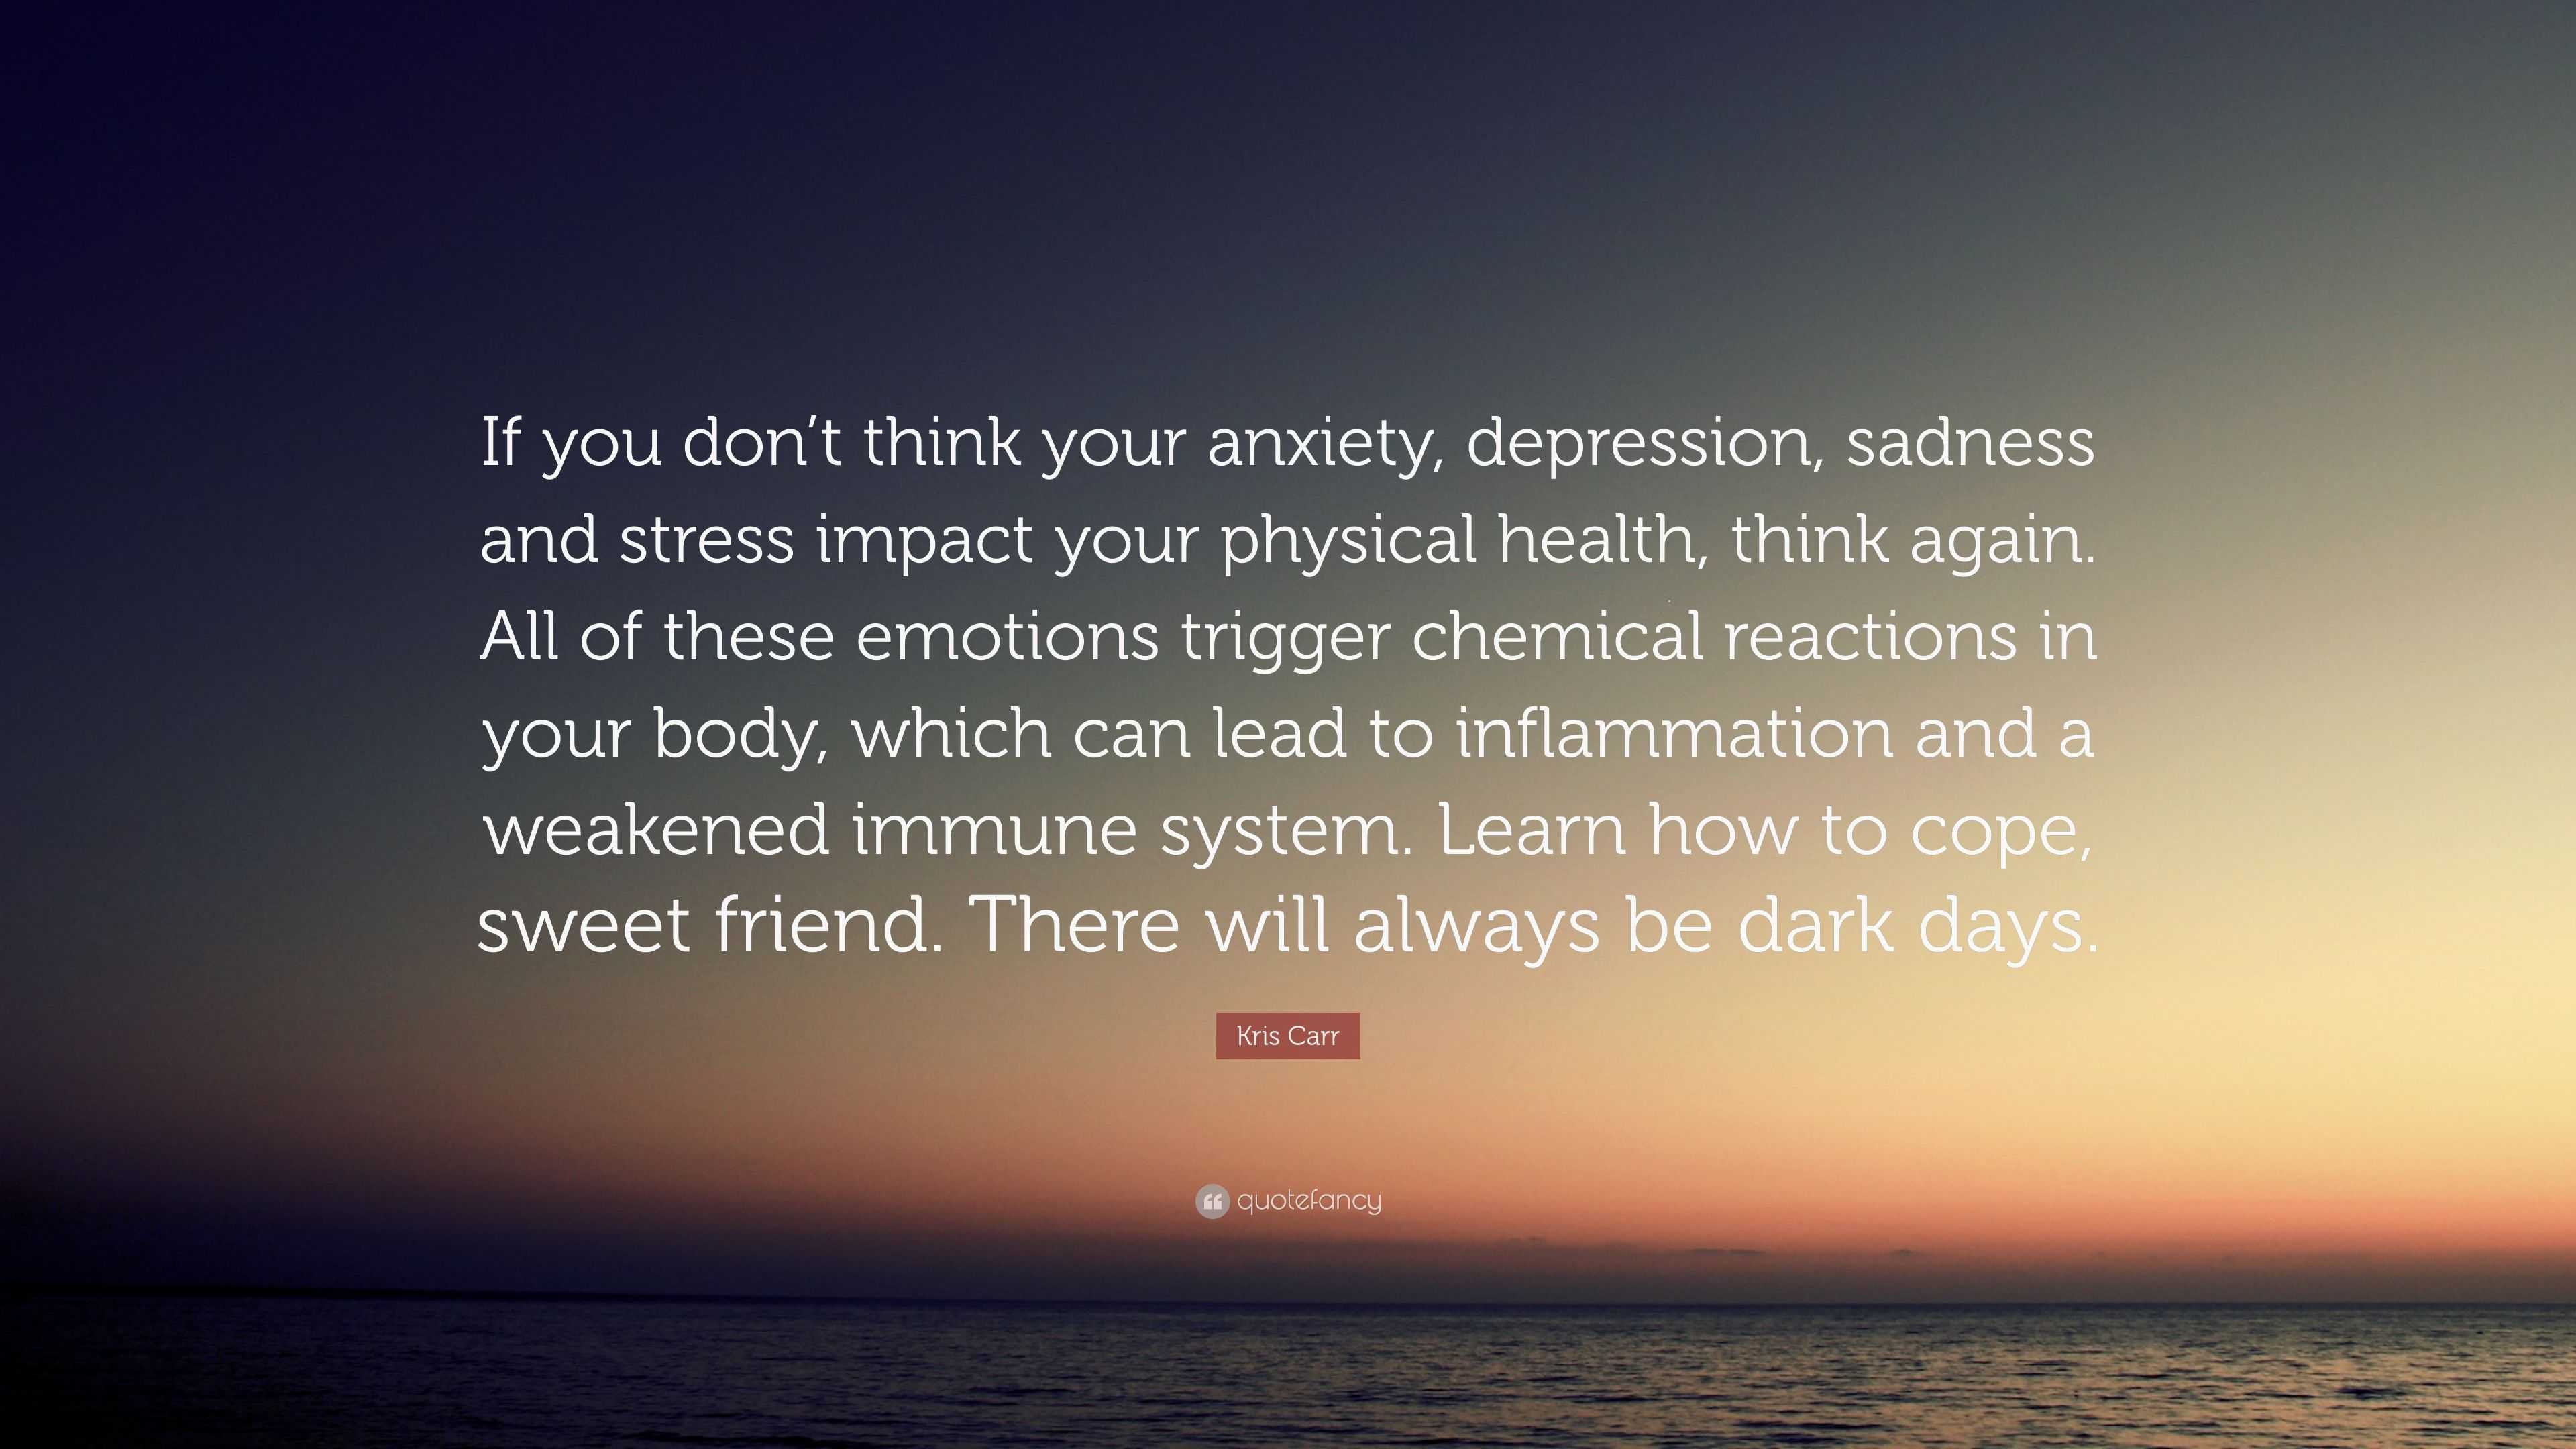 Kris Carr Quote: “If you don’t think your anxiety, depression, sadness